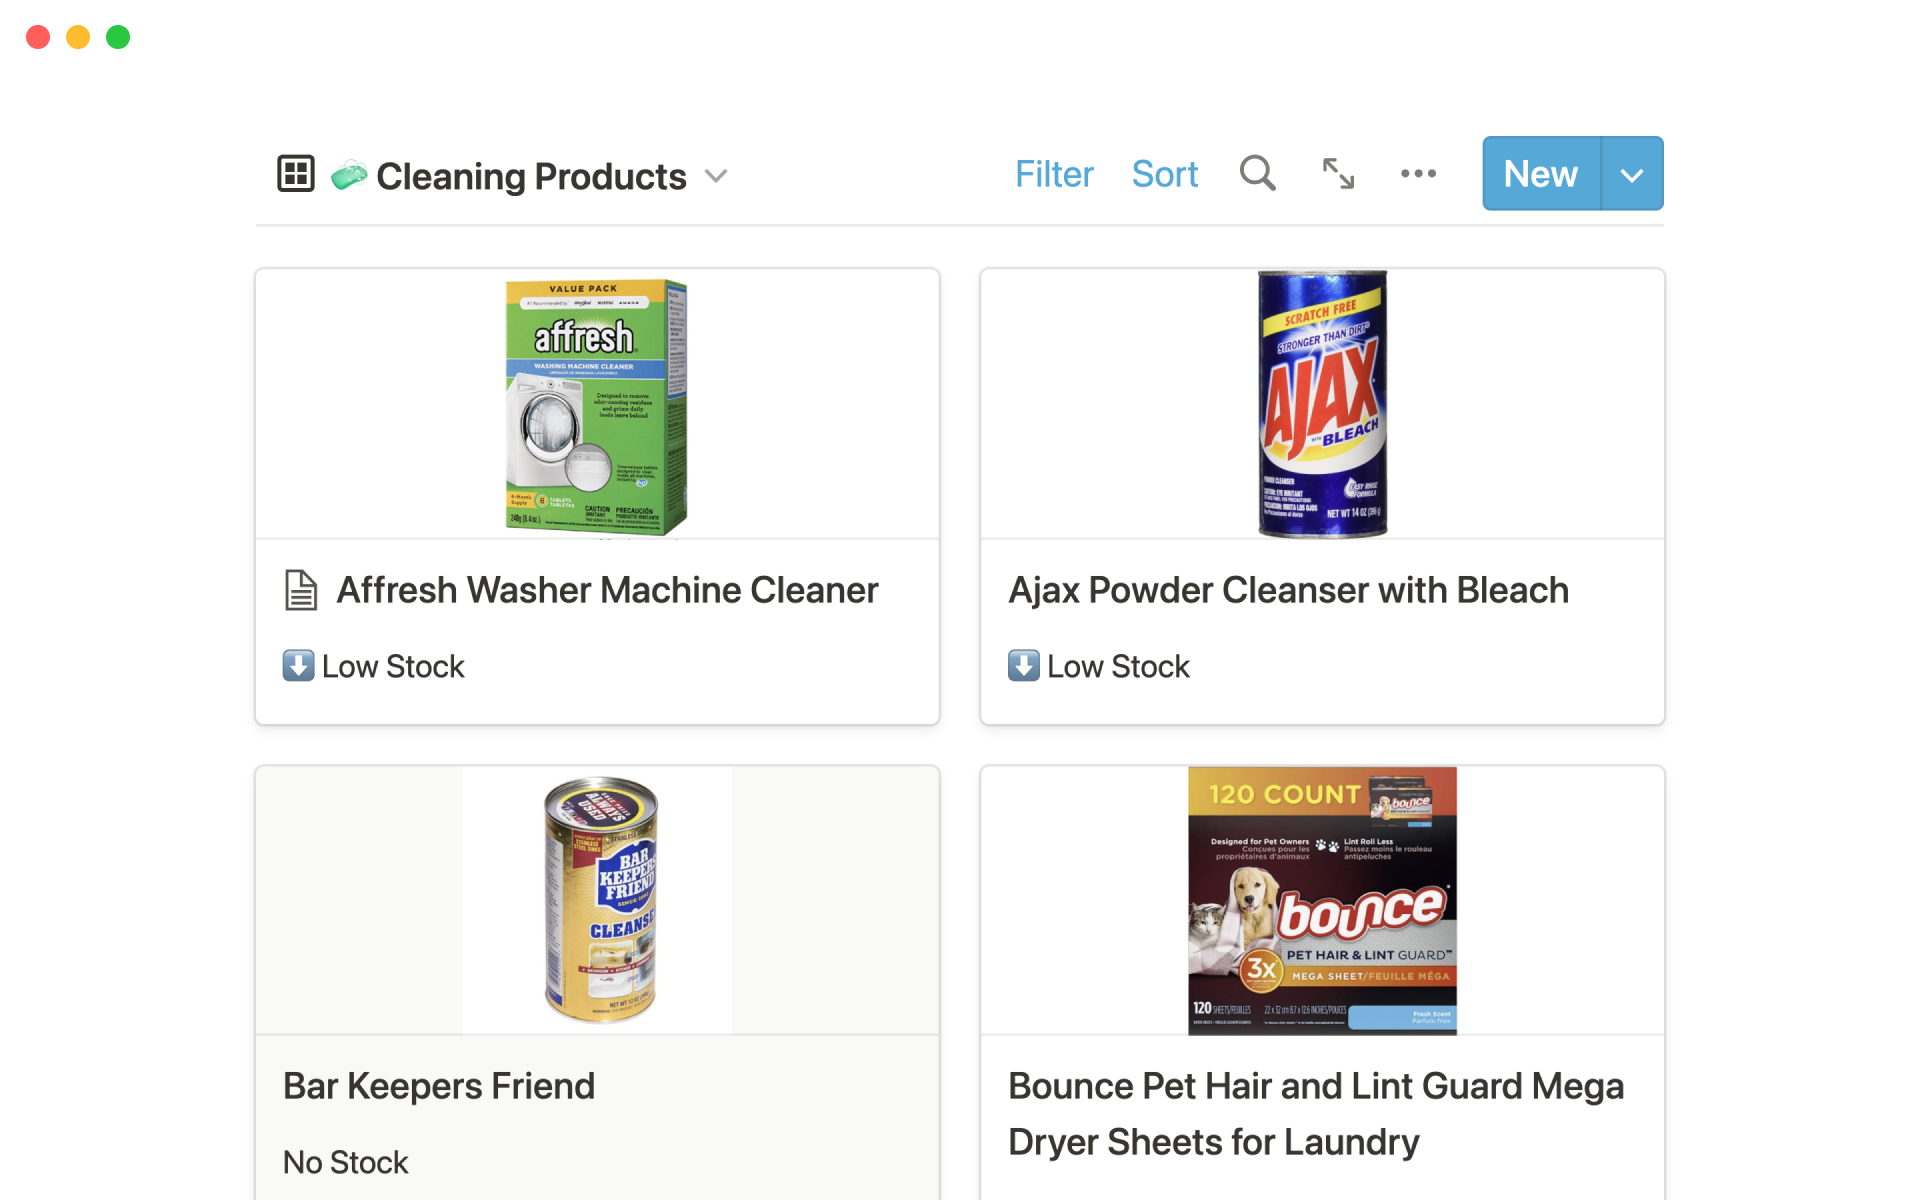 Stay on top of your cleaning schedule by organizing your cleaning products and equipment.